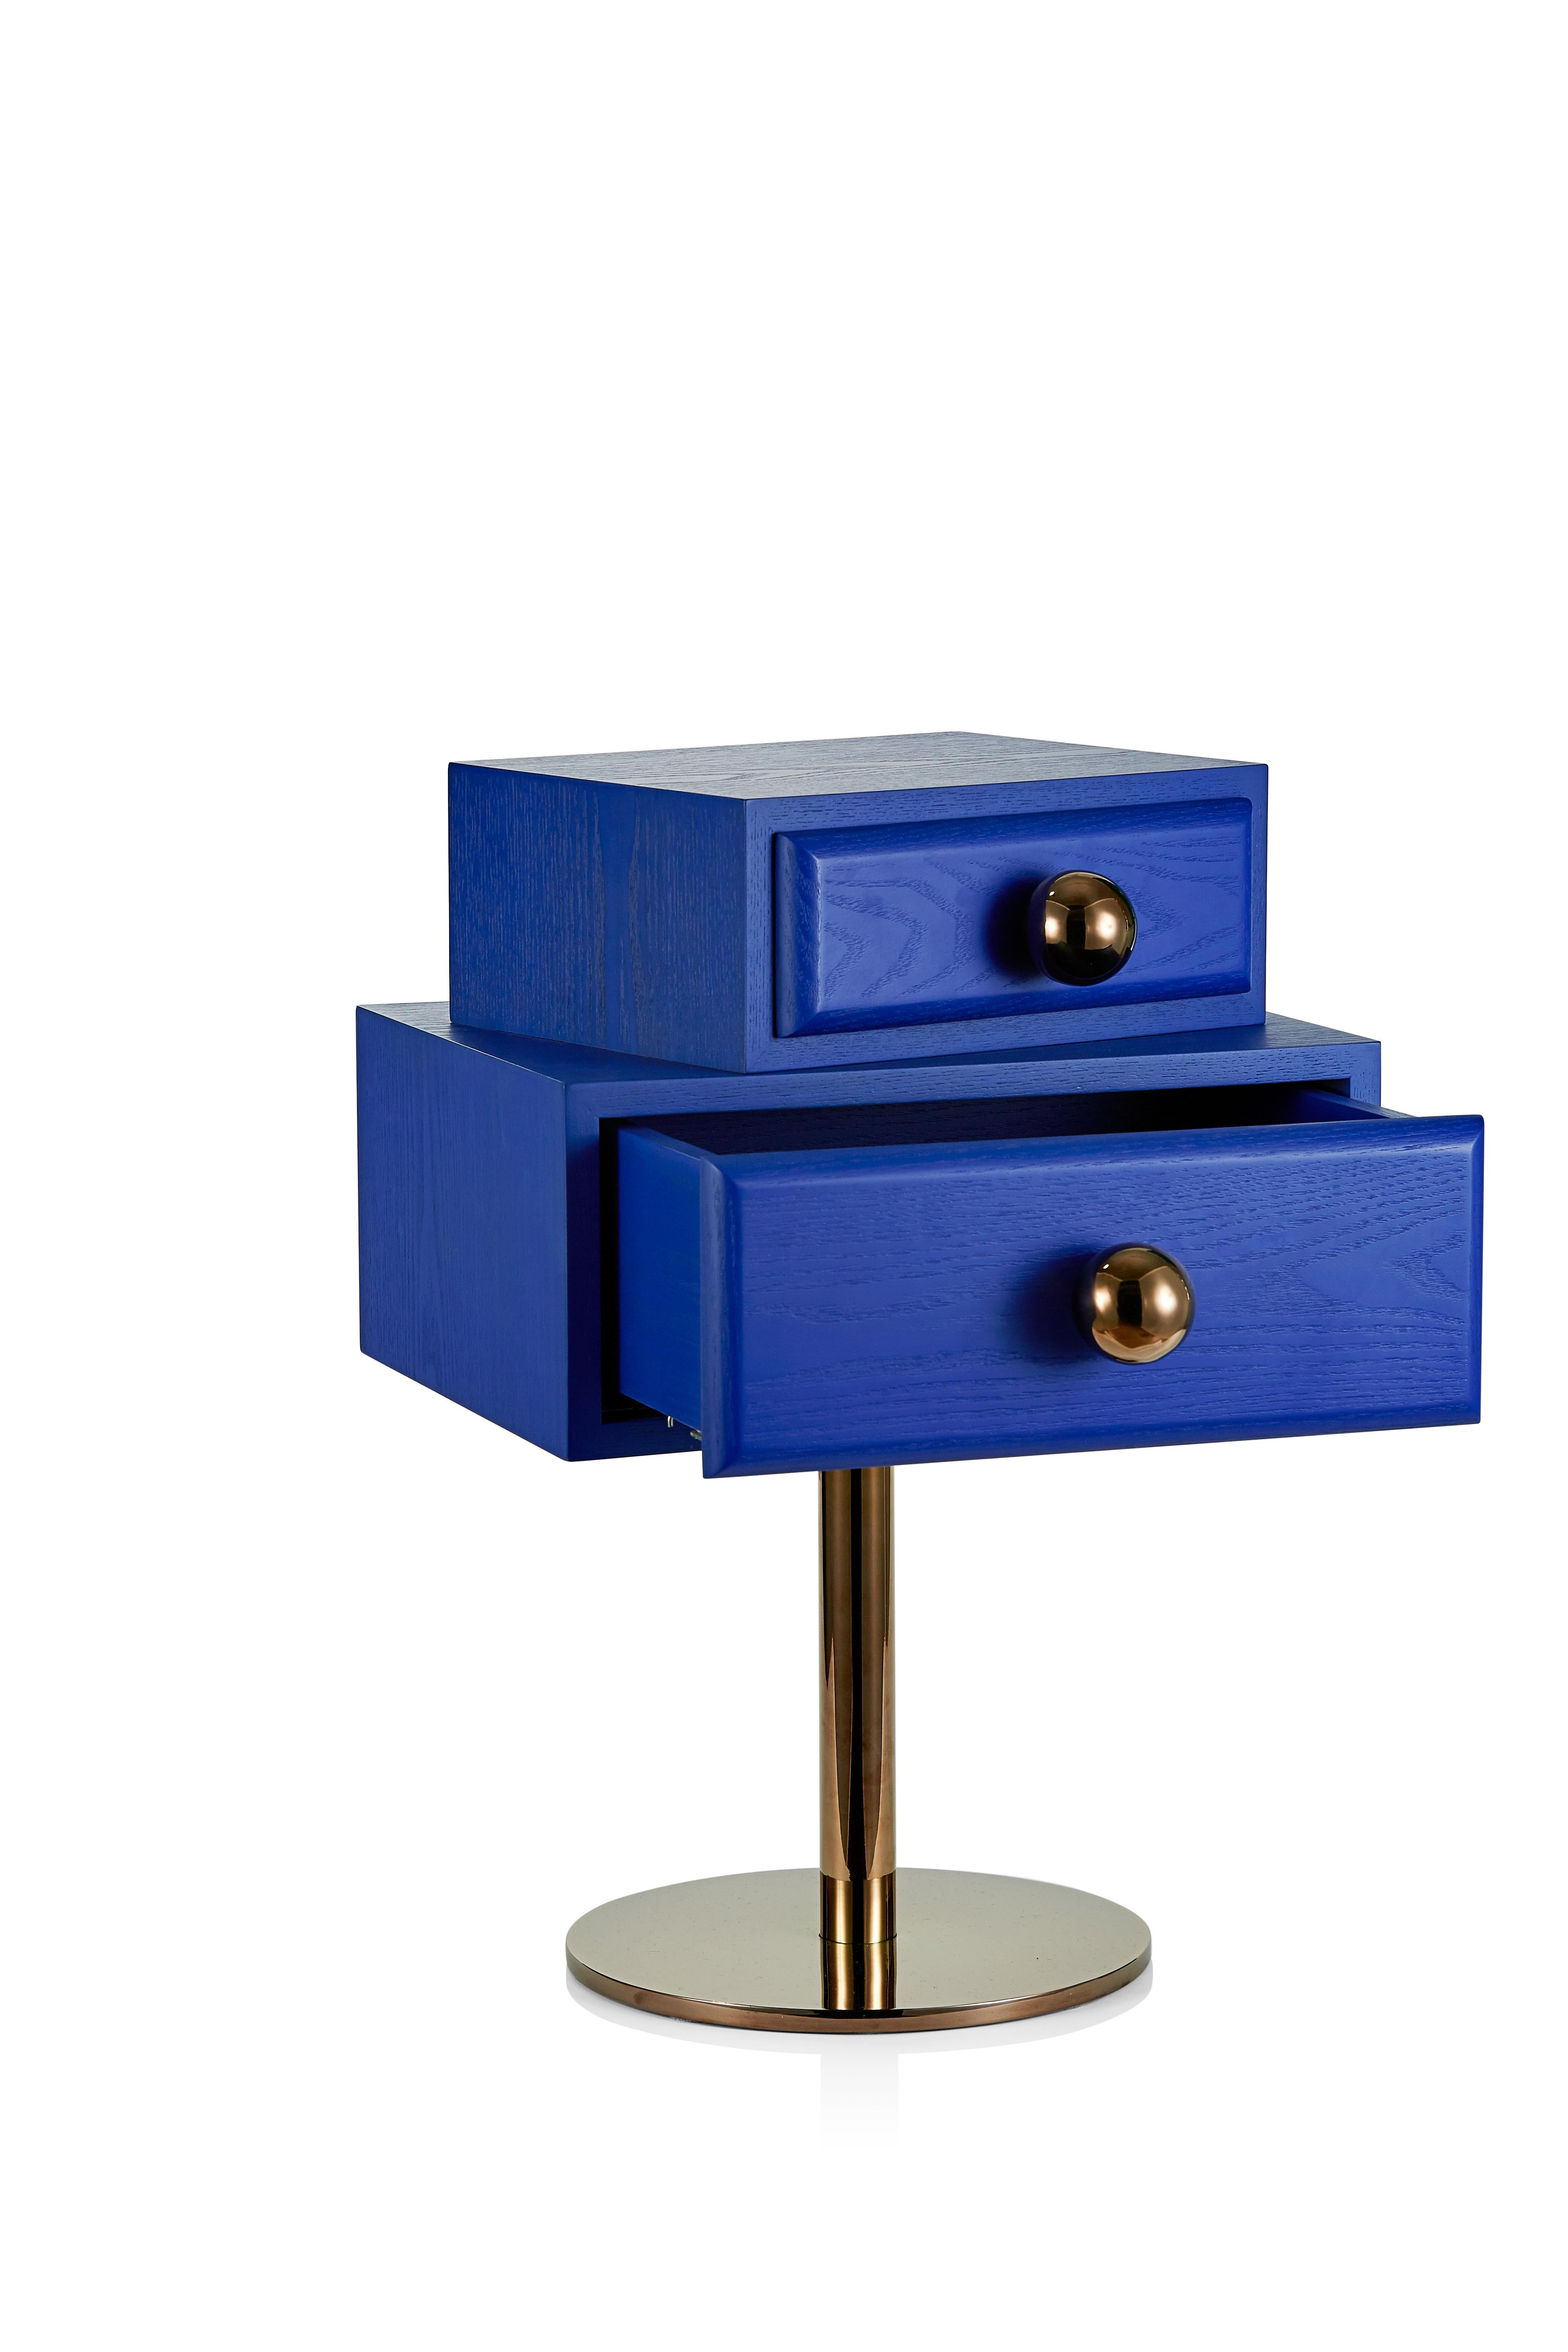 Stand by me side table by Thomas Dariel
Dimensions: D 36.6 x W 38 x H 55 cm 
Materials: Two versions: Left, Right Structure in MDF with painted ash veneer Metal base plated with glossy Pink Copper finish Handle knob in plated metal with glossy